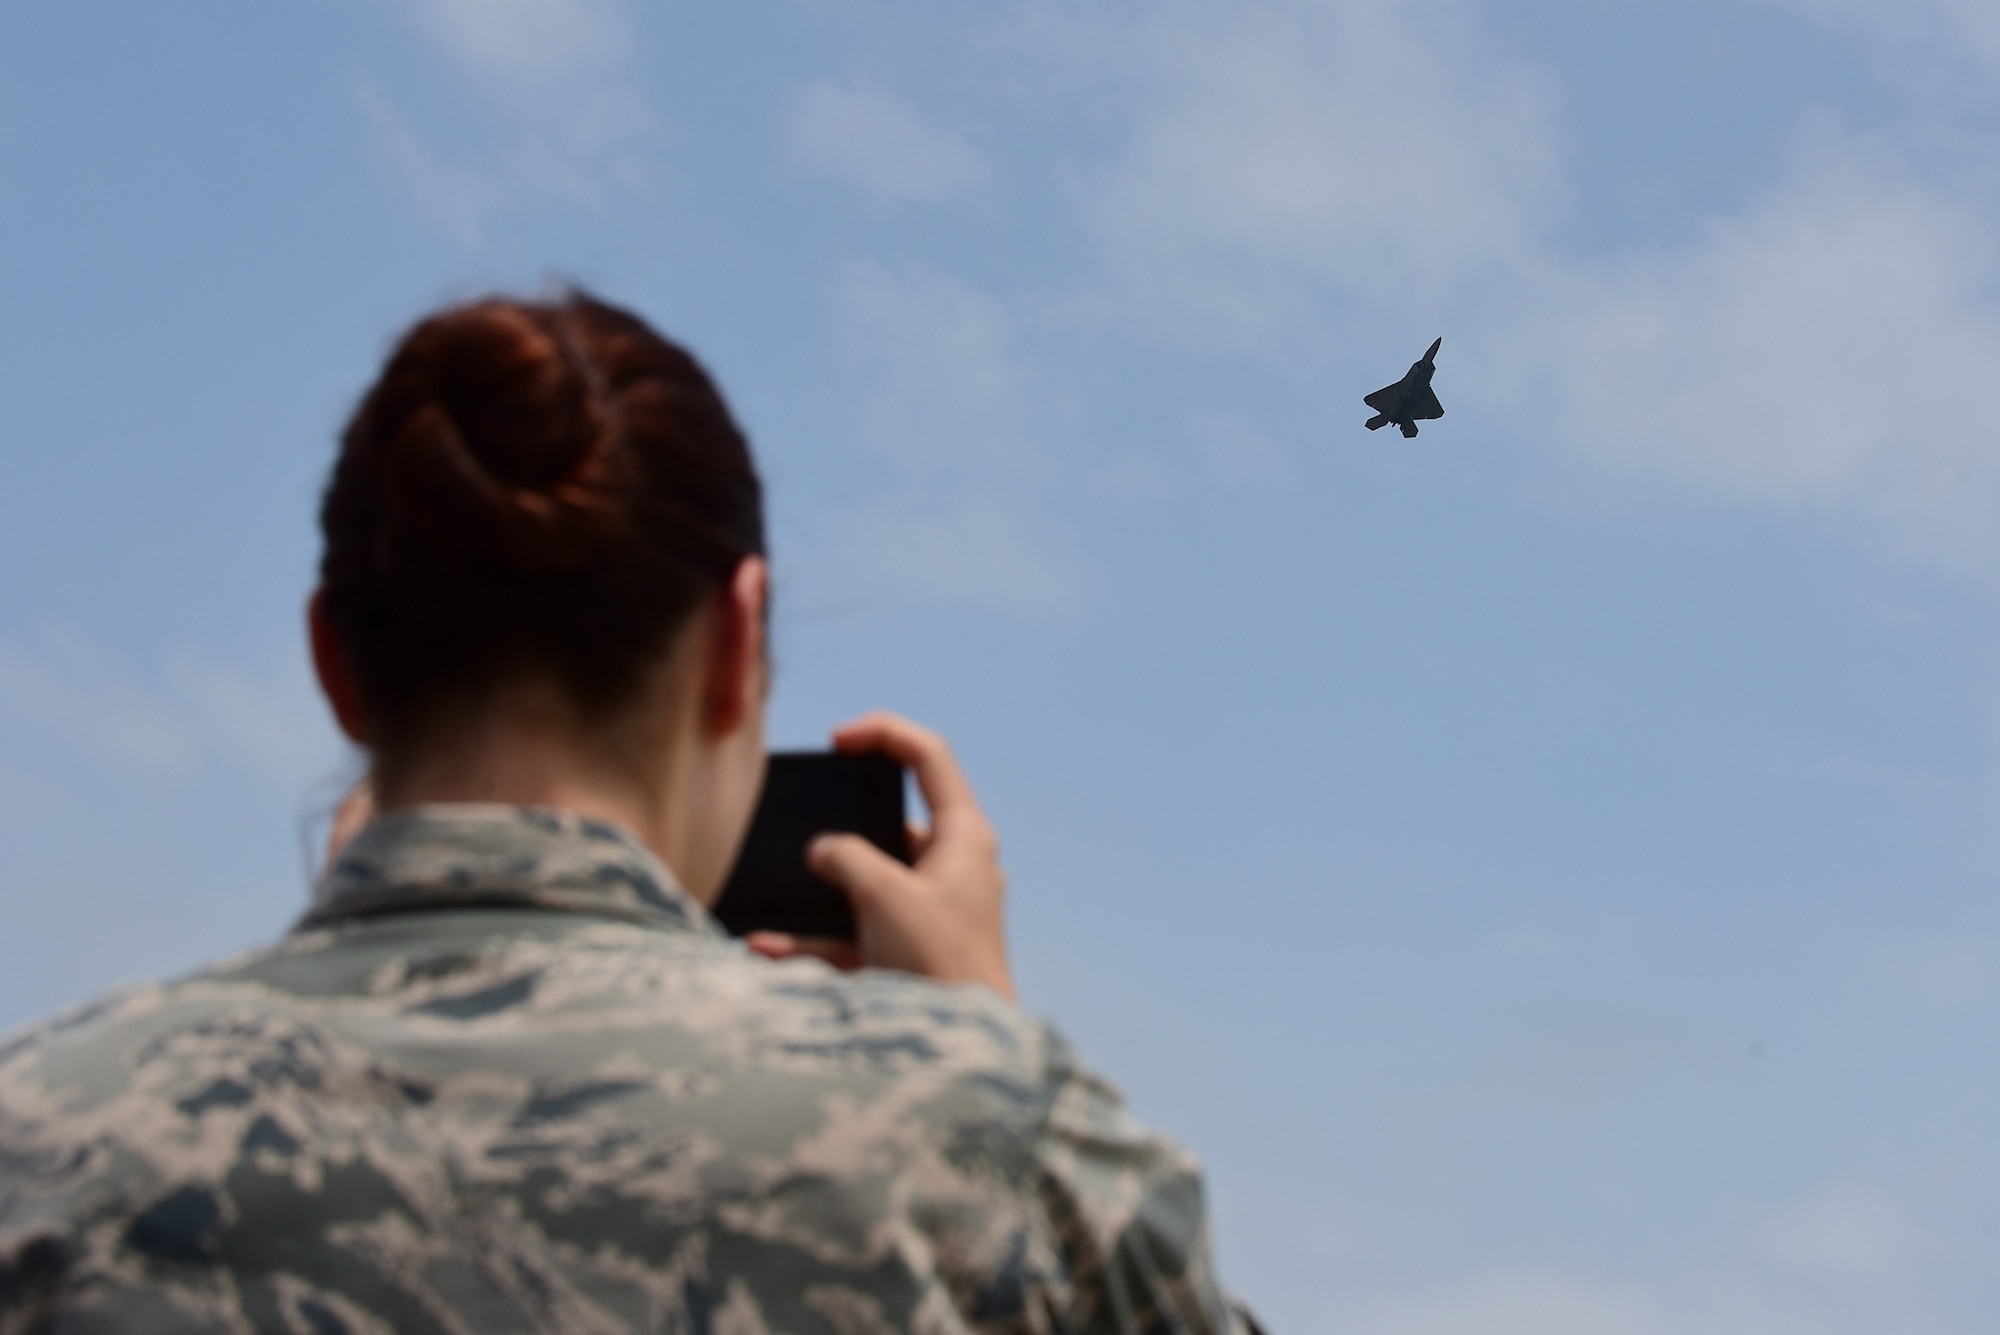 An Airman watches as Maj. Daniel Dickinson, F-22 Raptor Demonstration Team pilot, flies during the Wings Over Wayne Air Show, May 21, 2017, at Seymour Johnson Air Force Base, North Carolina. The fifth-generation fighter supports both air-to-air and air-to-ground missions vital to the 21st century Air Force. (U.S. Air Force photo by Airman 1st Class Kenneth Boyton)